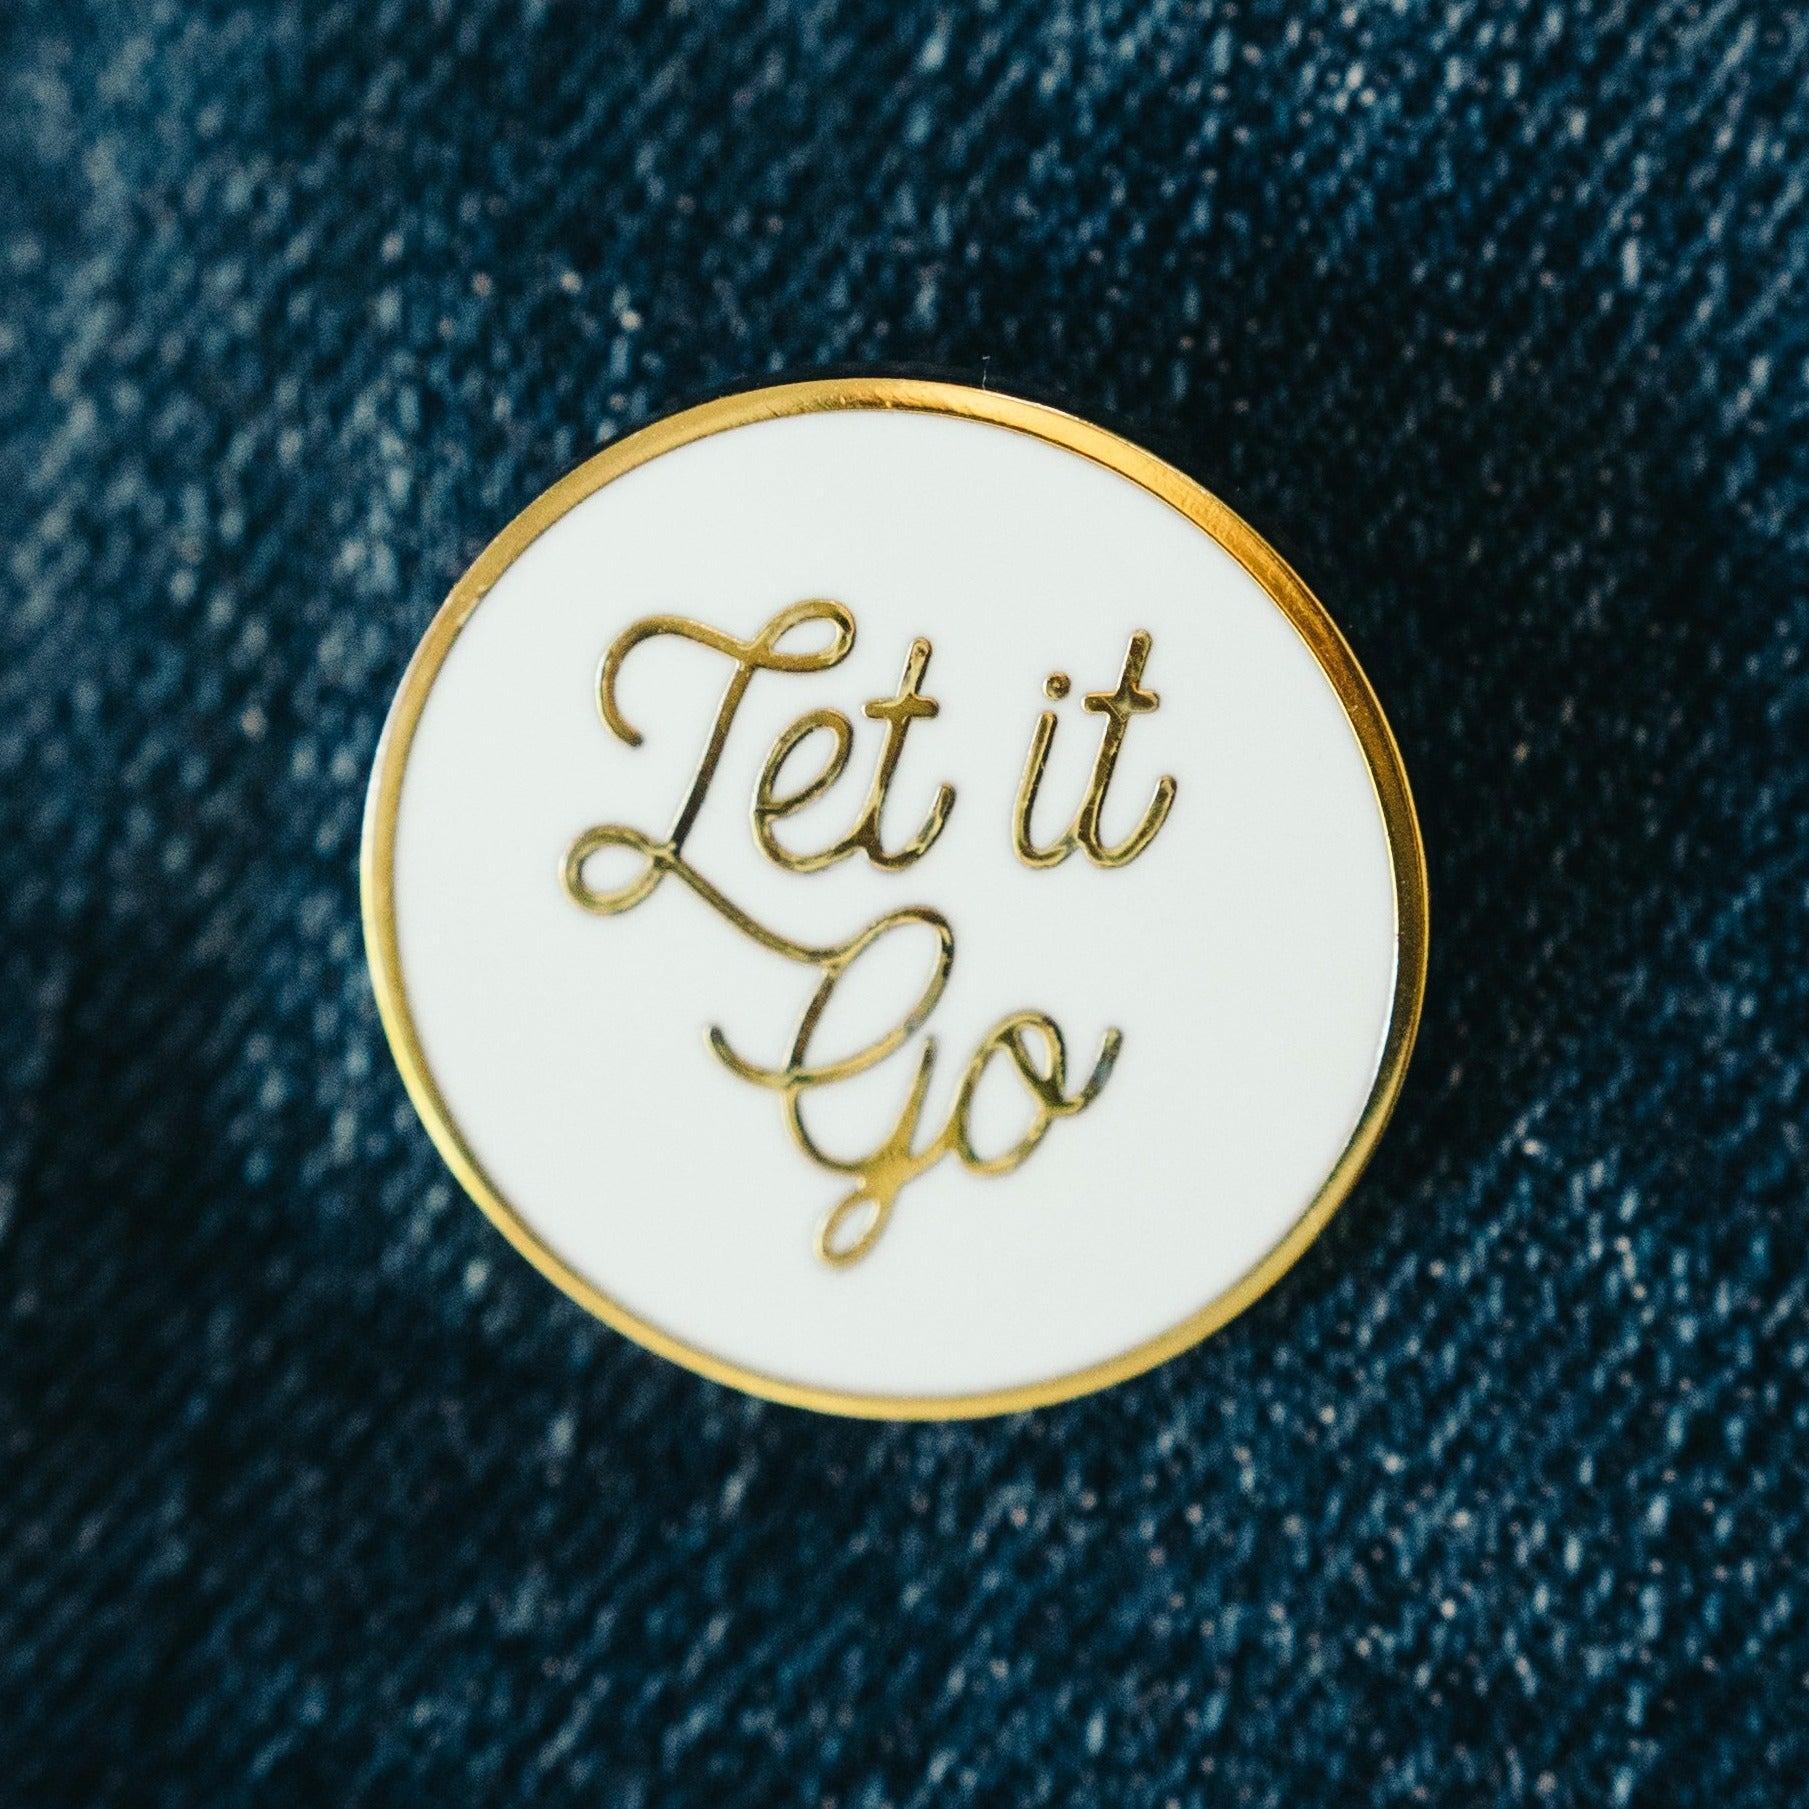 Let it Go enamel pin inspirational gift ideas for those that love meditation, yoga, and mindfulness